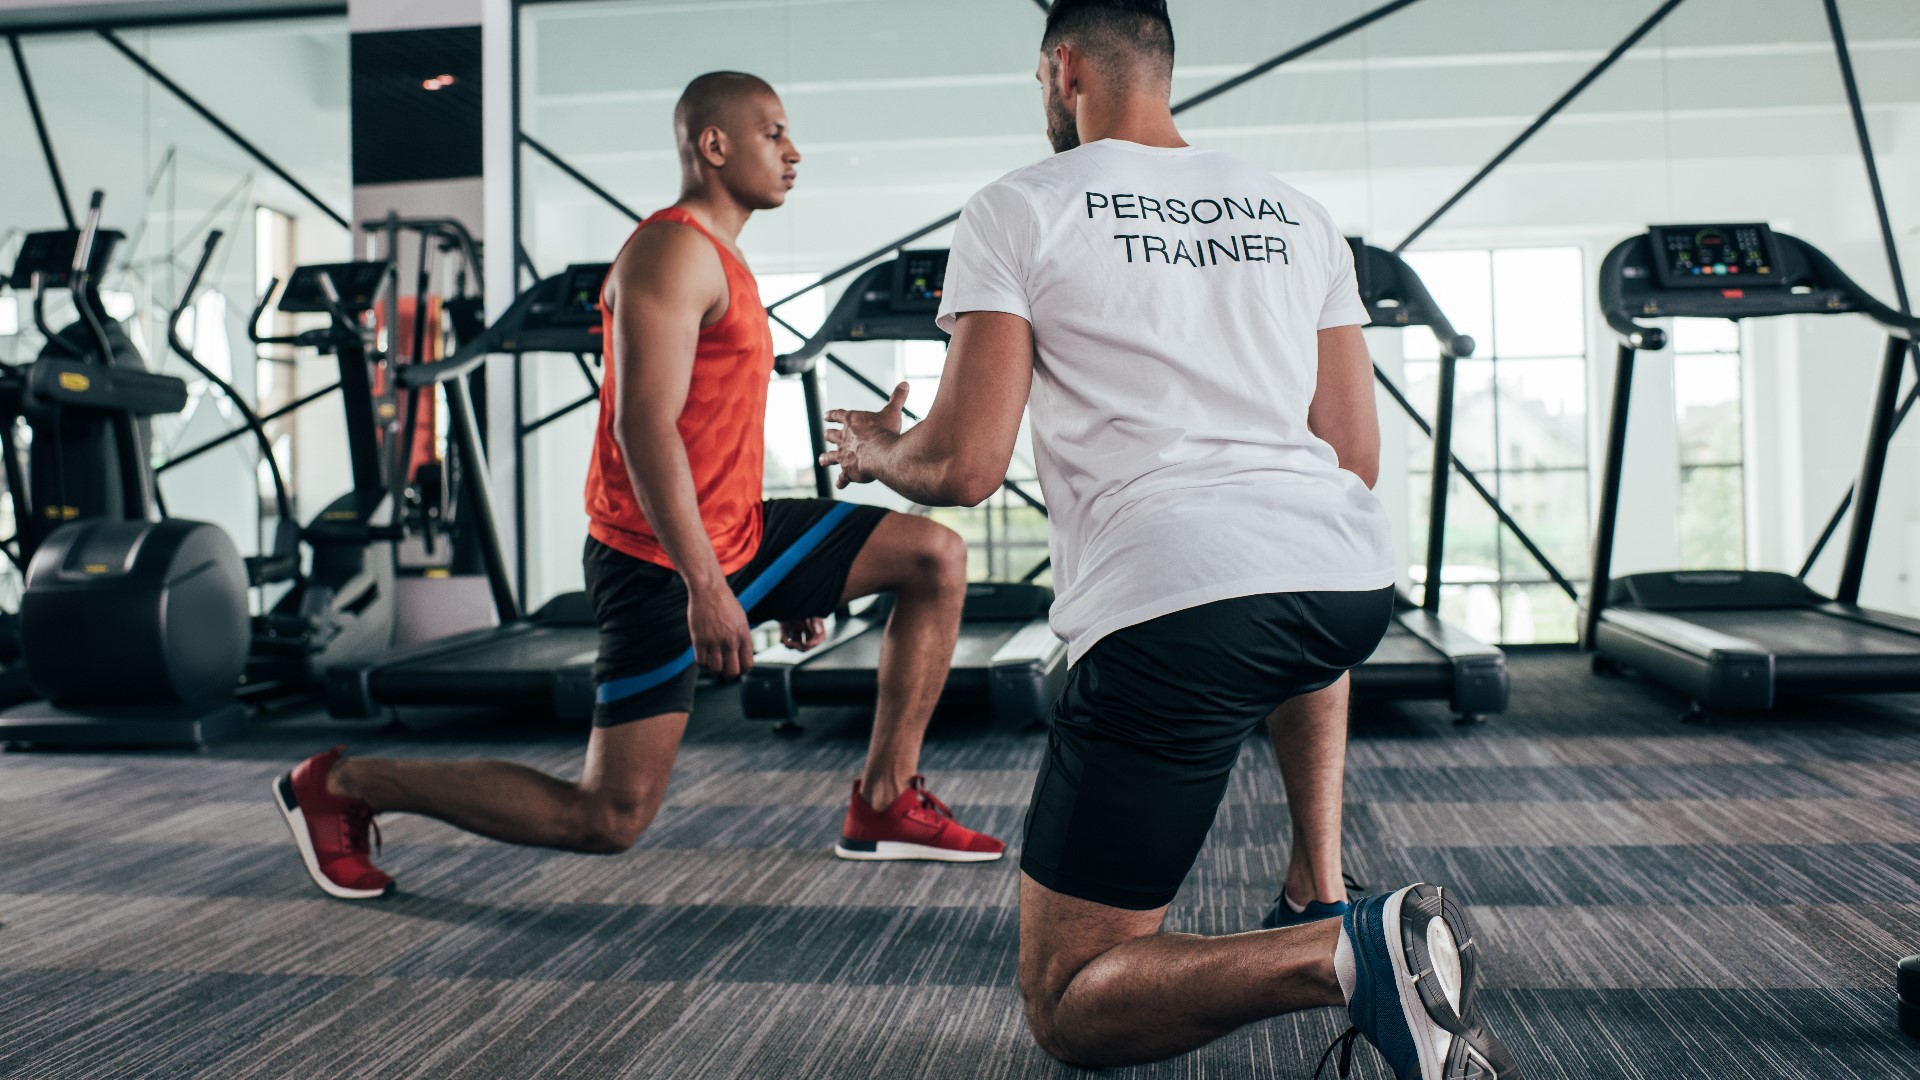 It's Men's' Health Month and Abundant Fitness shows different options for everyone to get a full body workout whether you're in shape or new to working out.